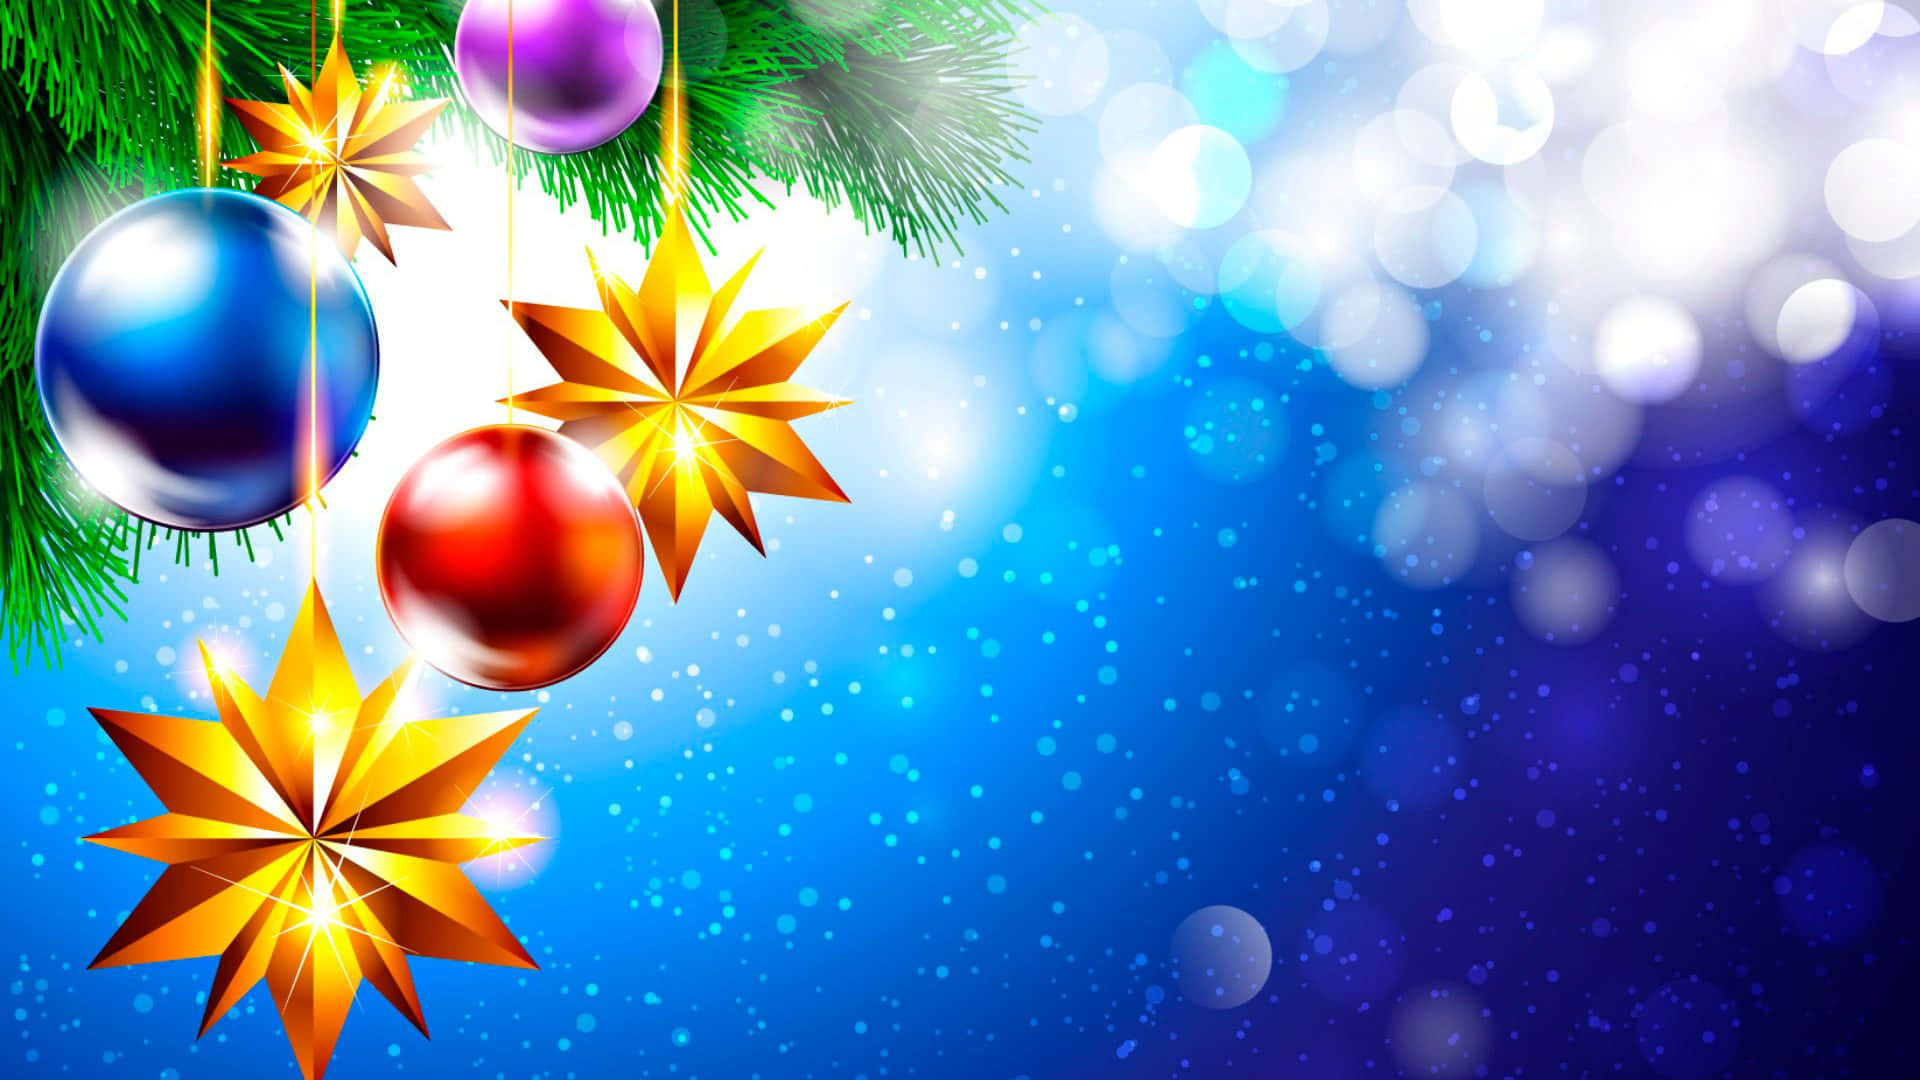 Download Christmas Tree With Colorful Ornaments And Stars | Wallpapers.com